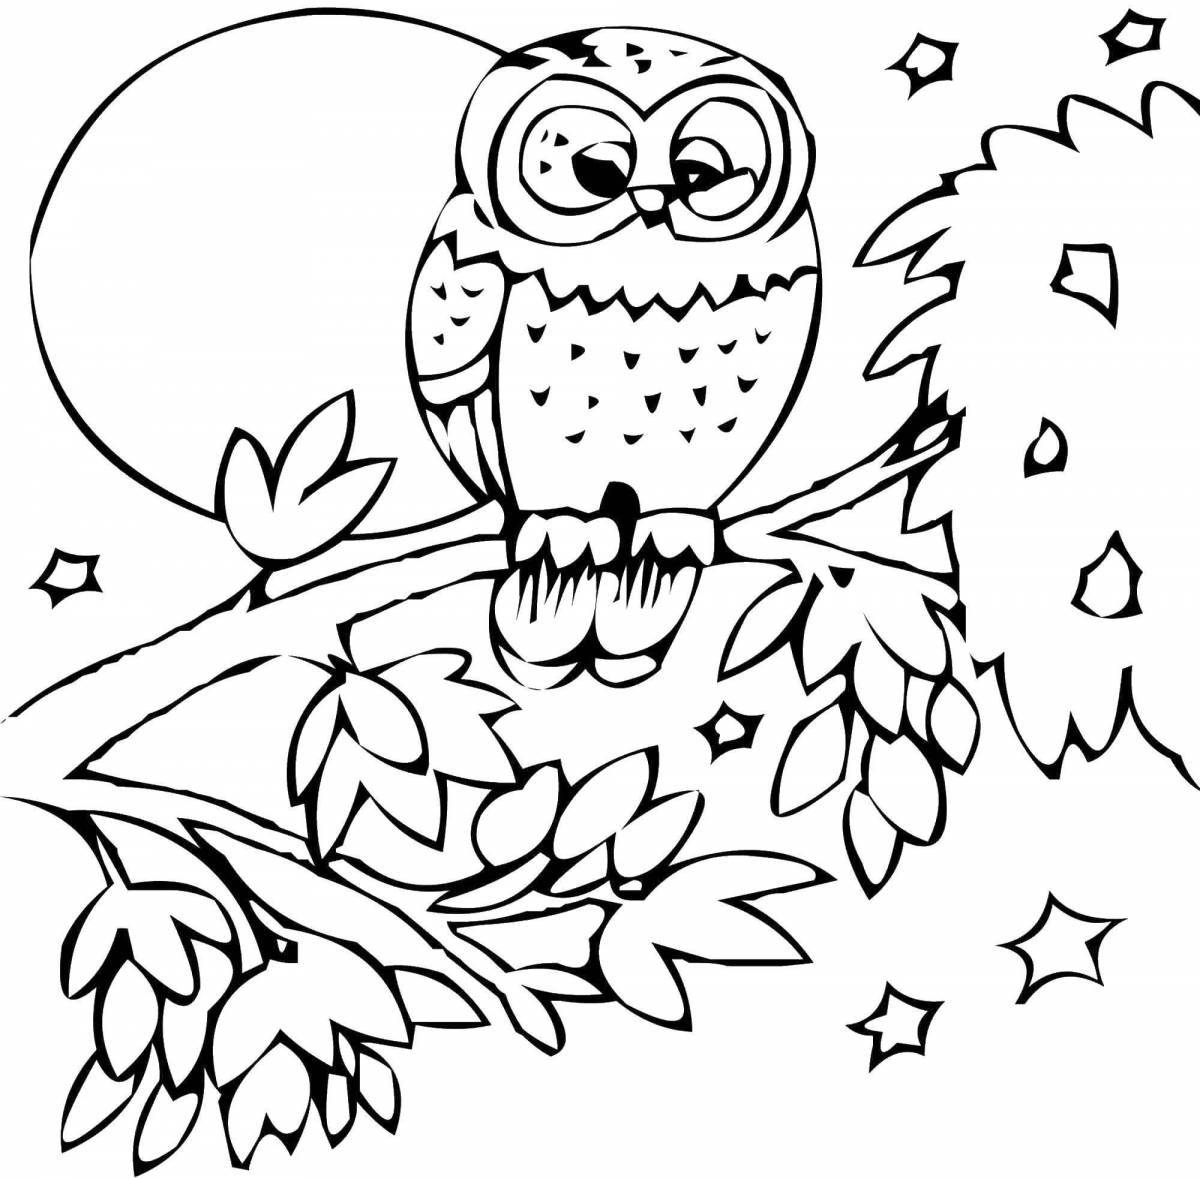 Glitter bird coloring page for 6-7 year olds